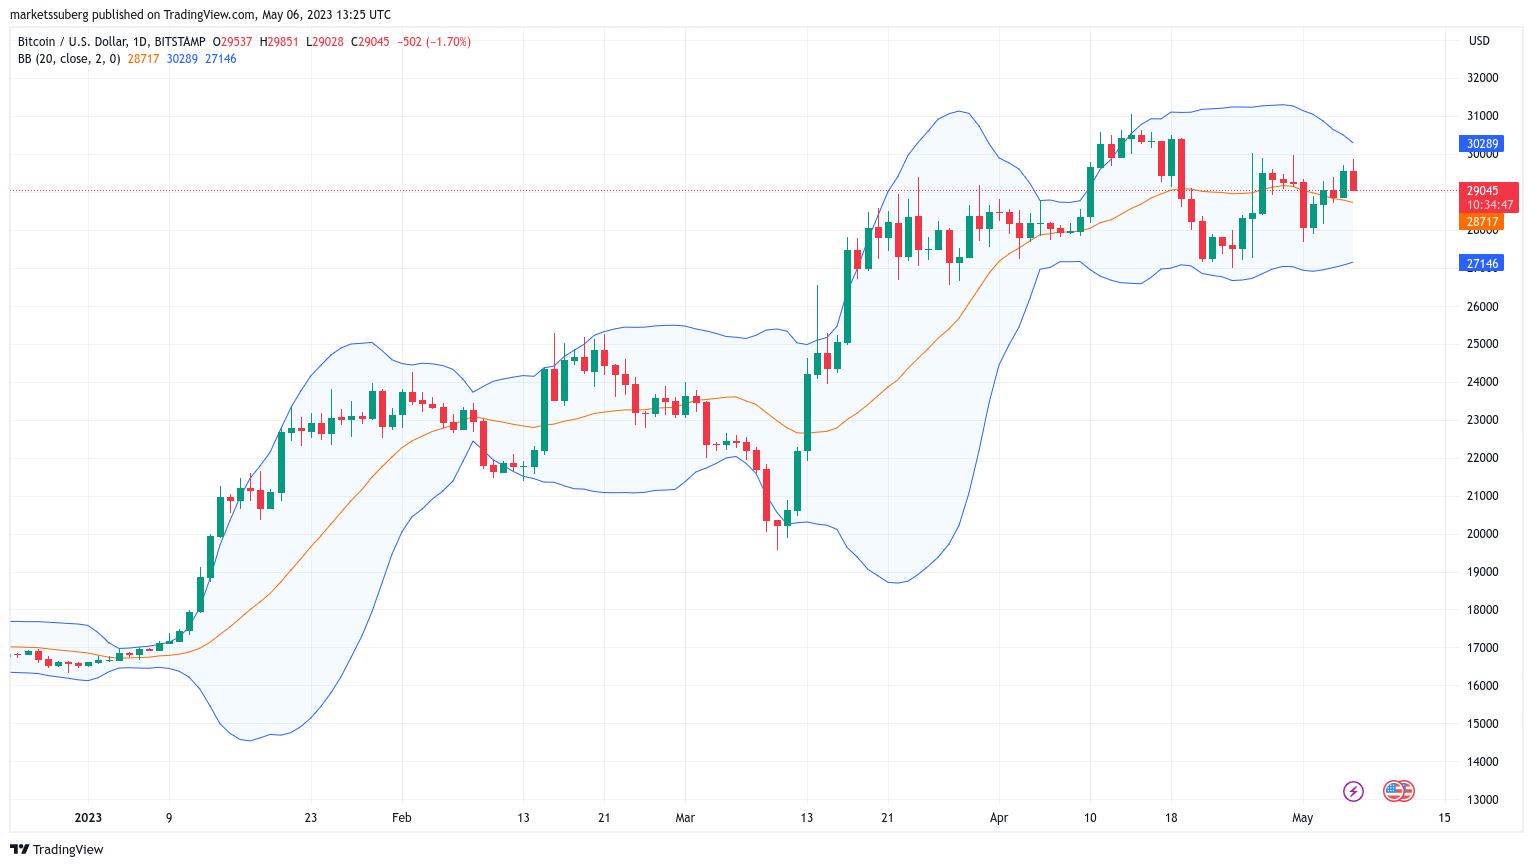 BTC USD 1-day candle chart (Bitstamp) with Bollinger bands